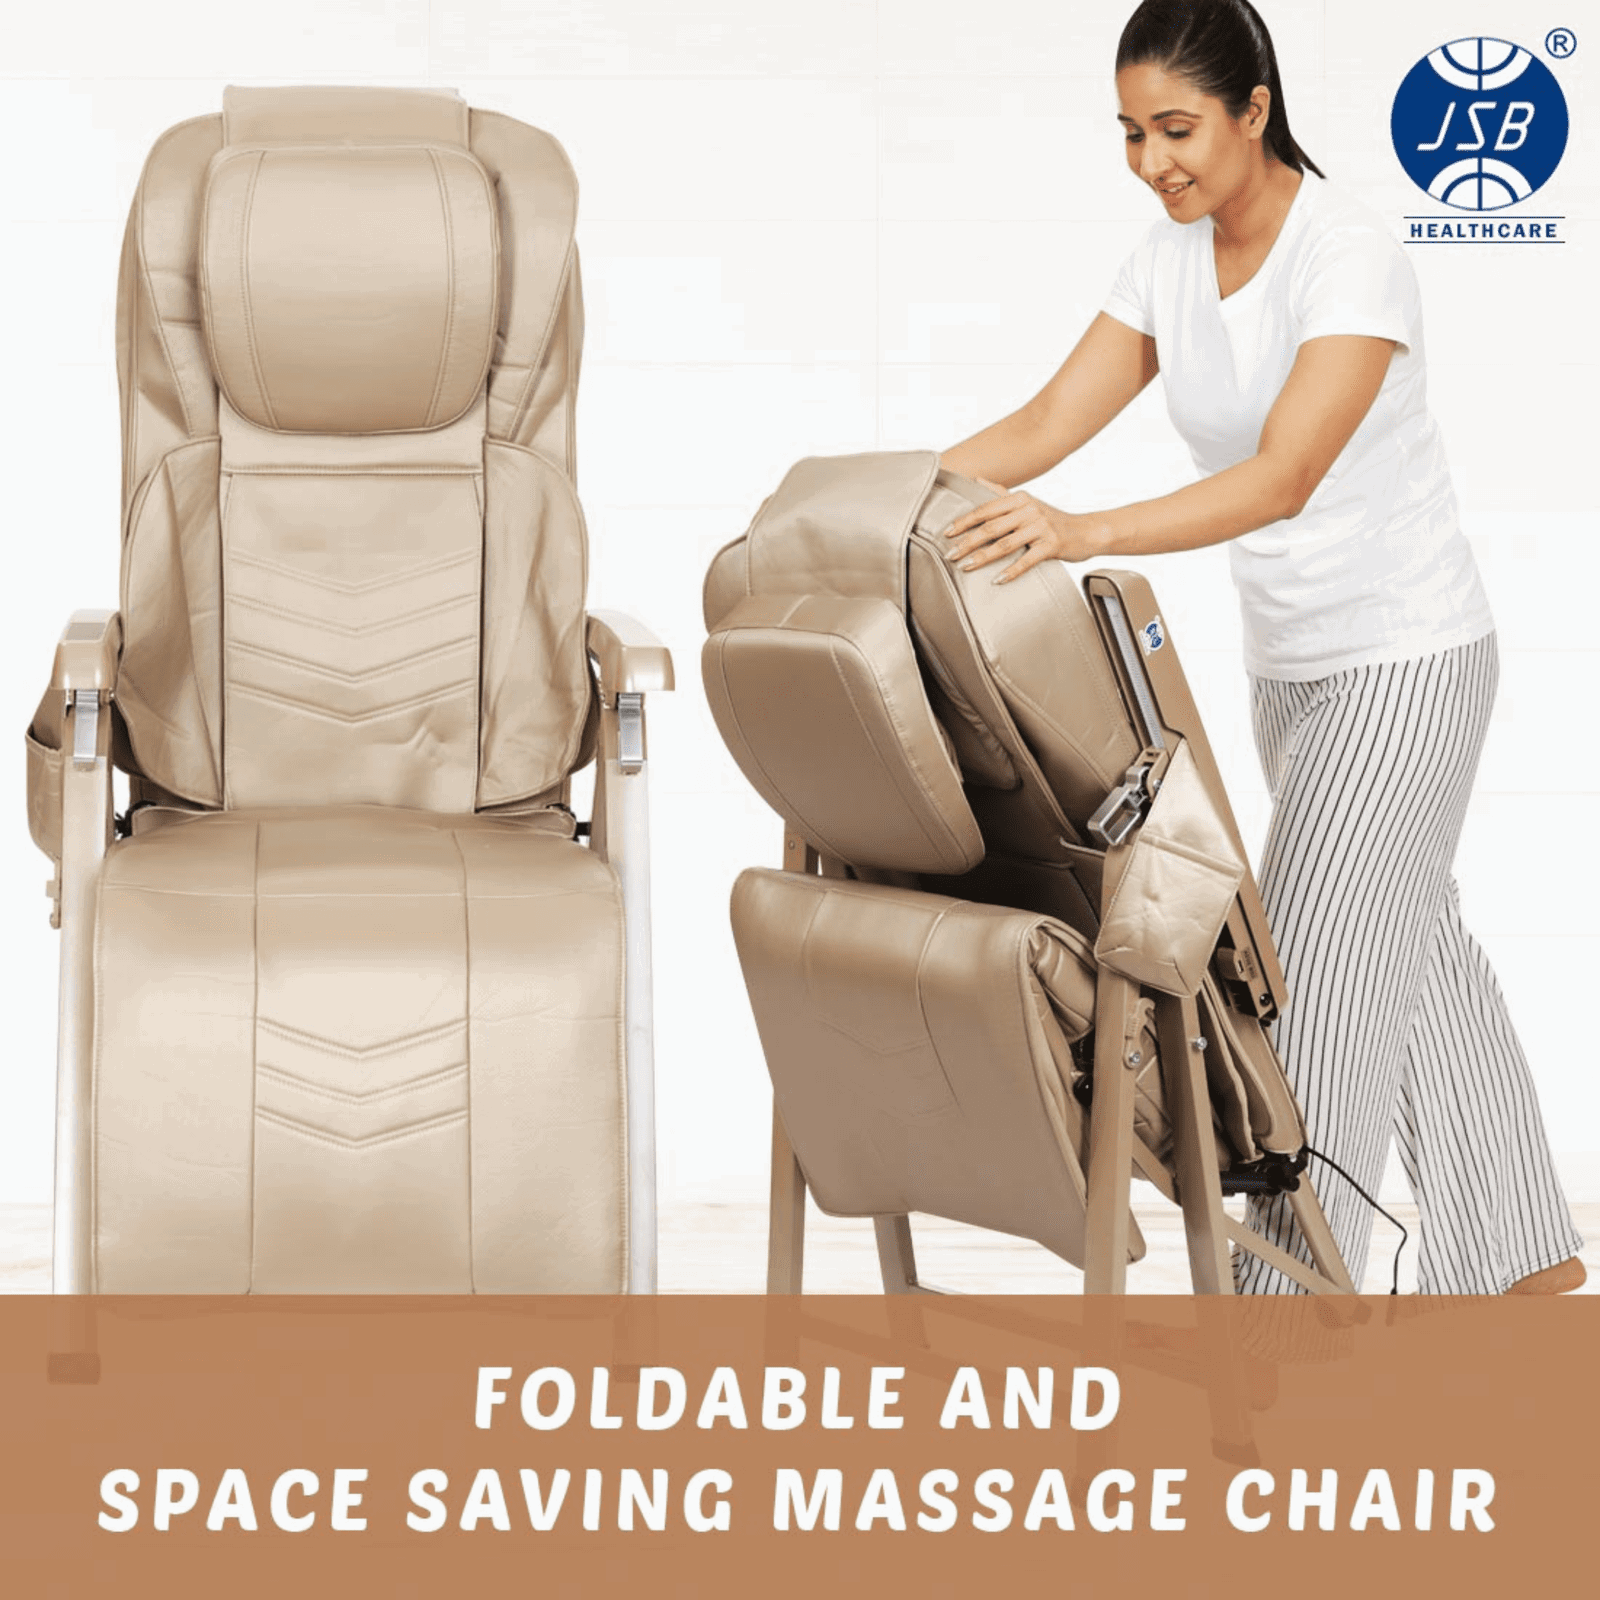 JSB HF170 recliner chair massager with Back, Neck, Hips Massage for Work From Home - JSB Healthcare 